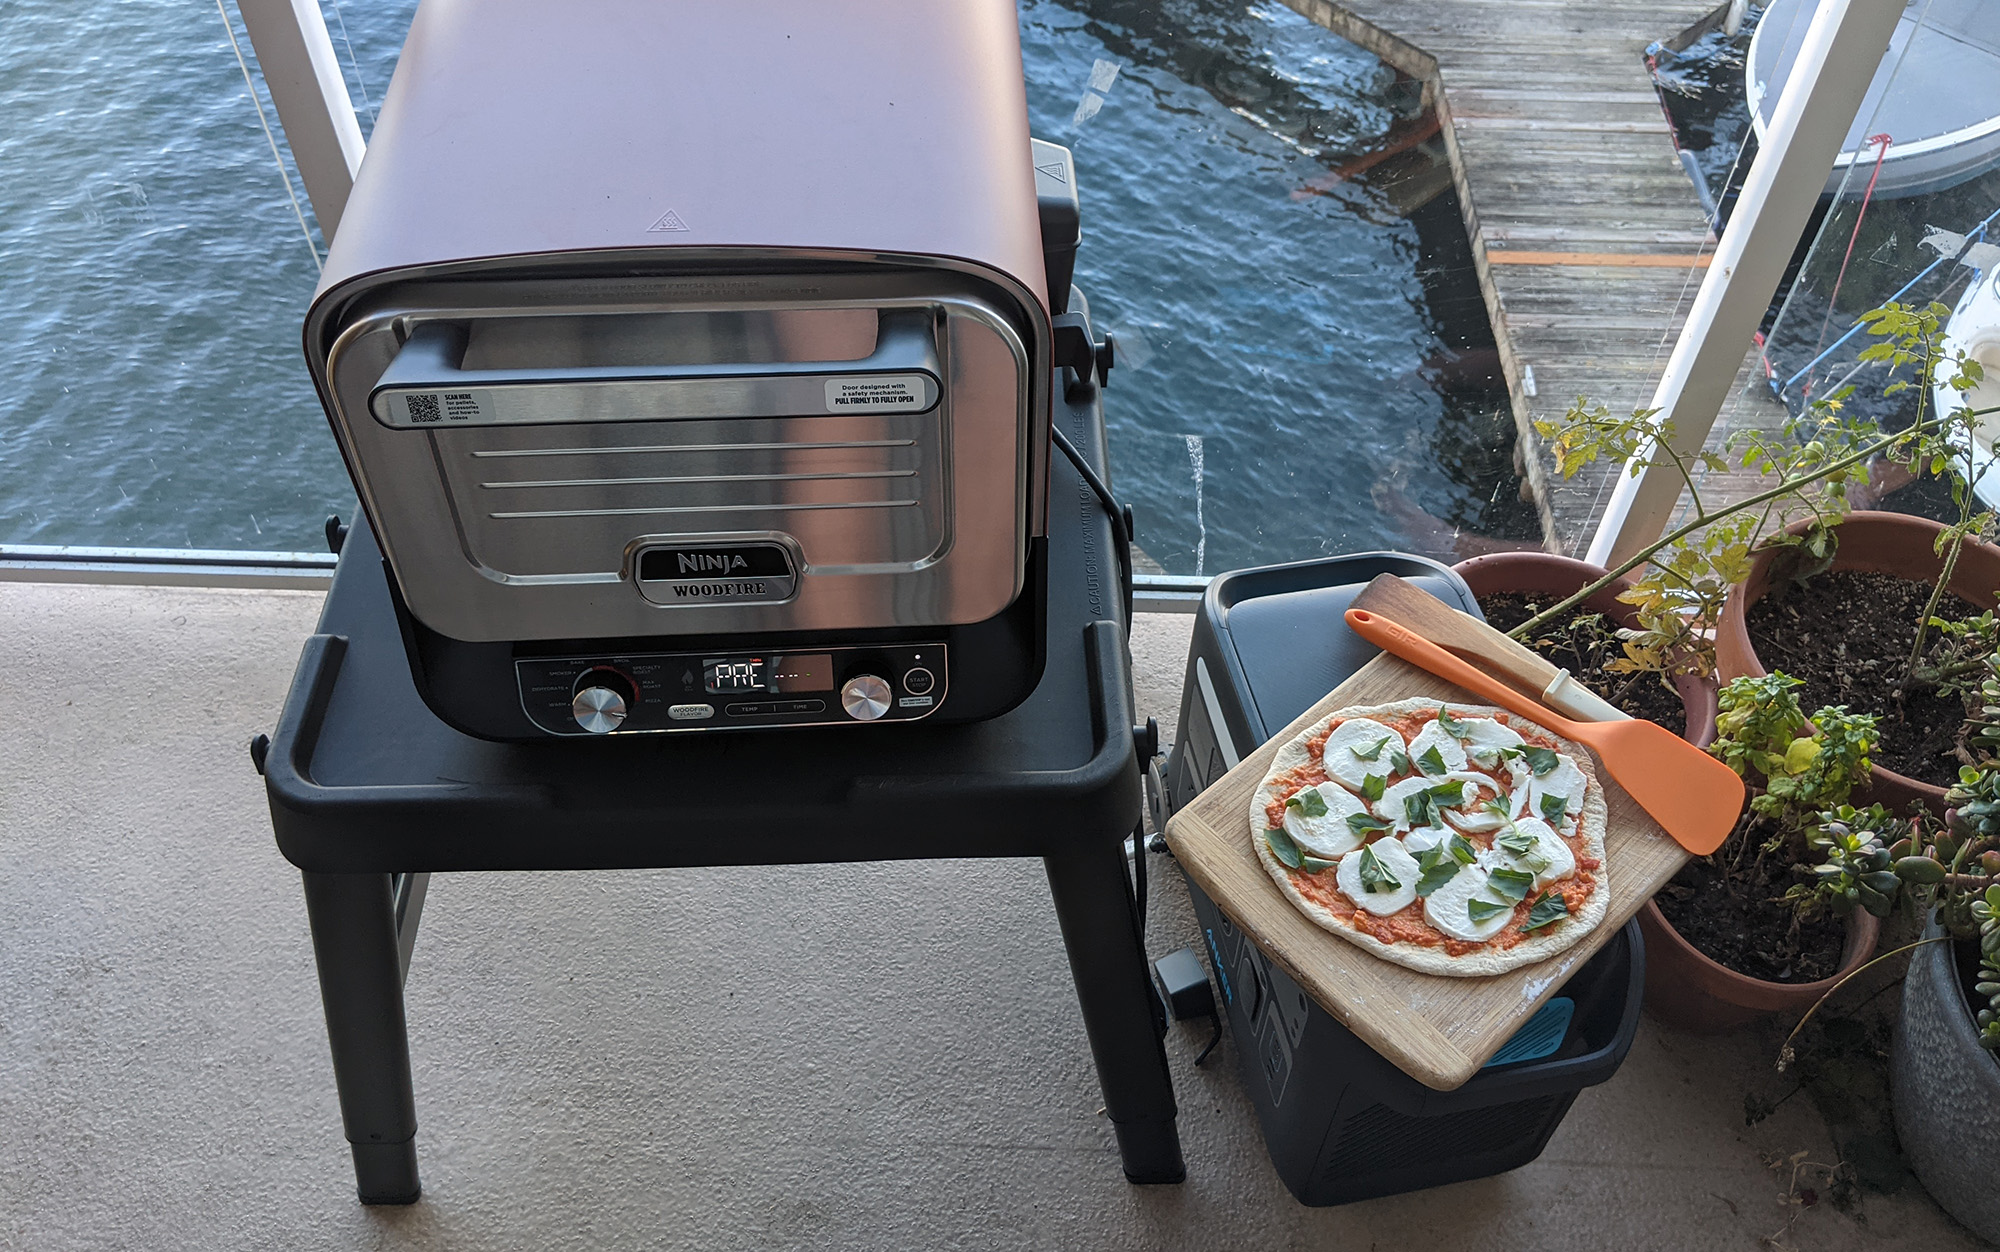 Ninja Woodfire 8-in-1 Outdoor Oven Review - We Tried It!